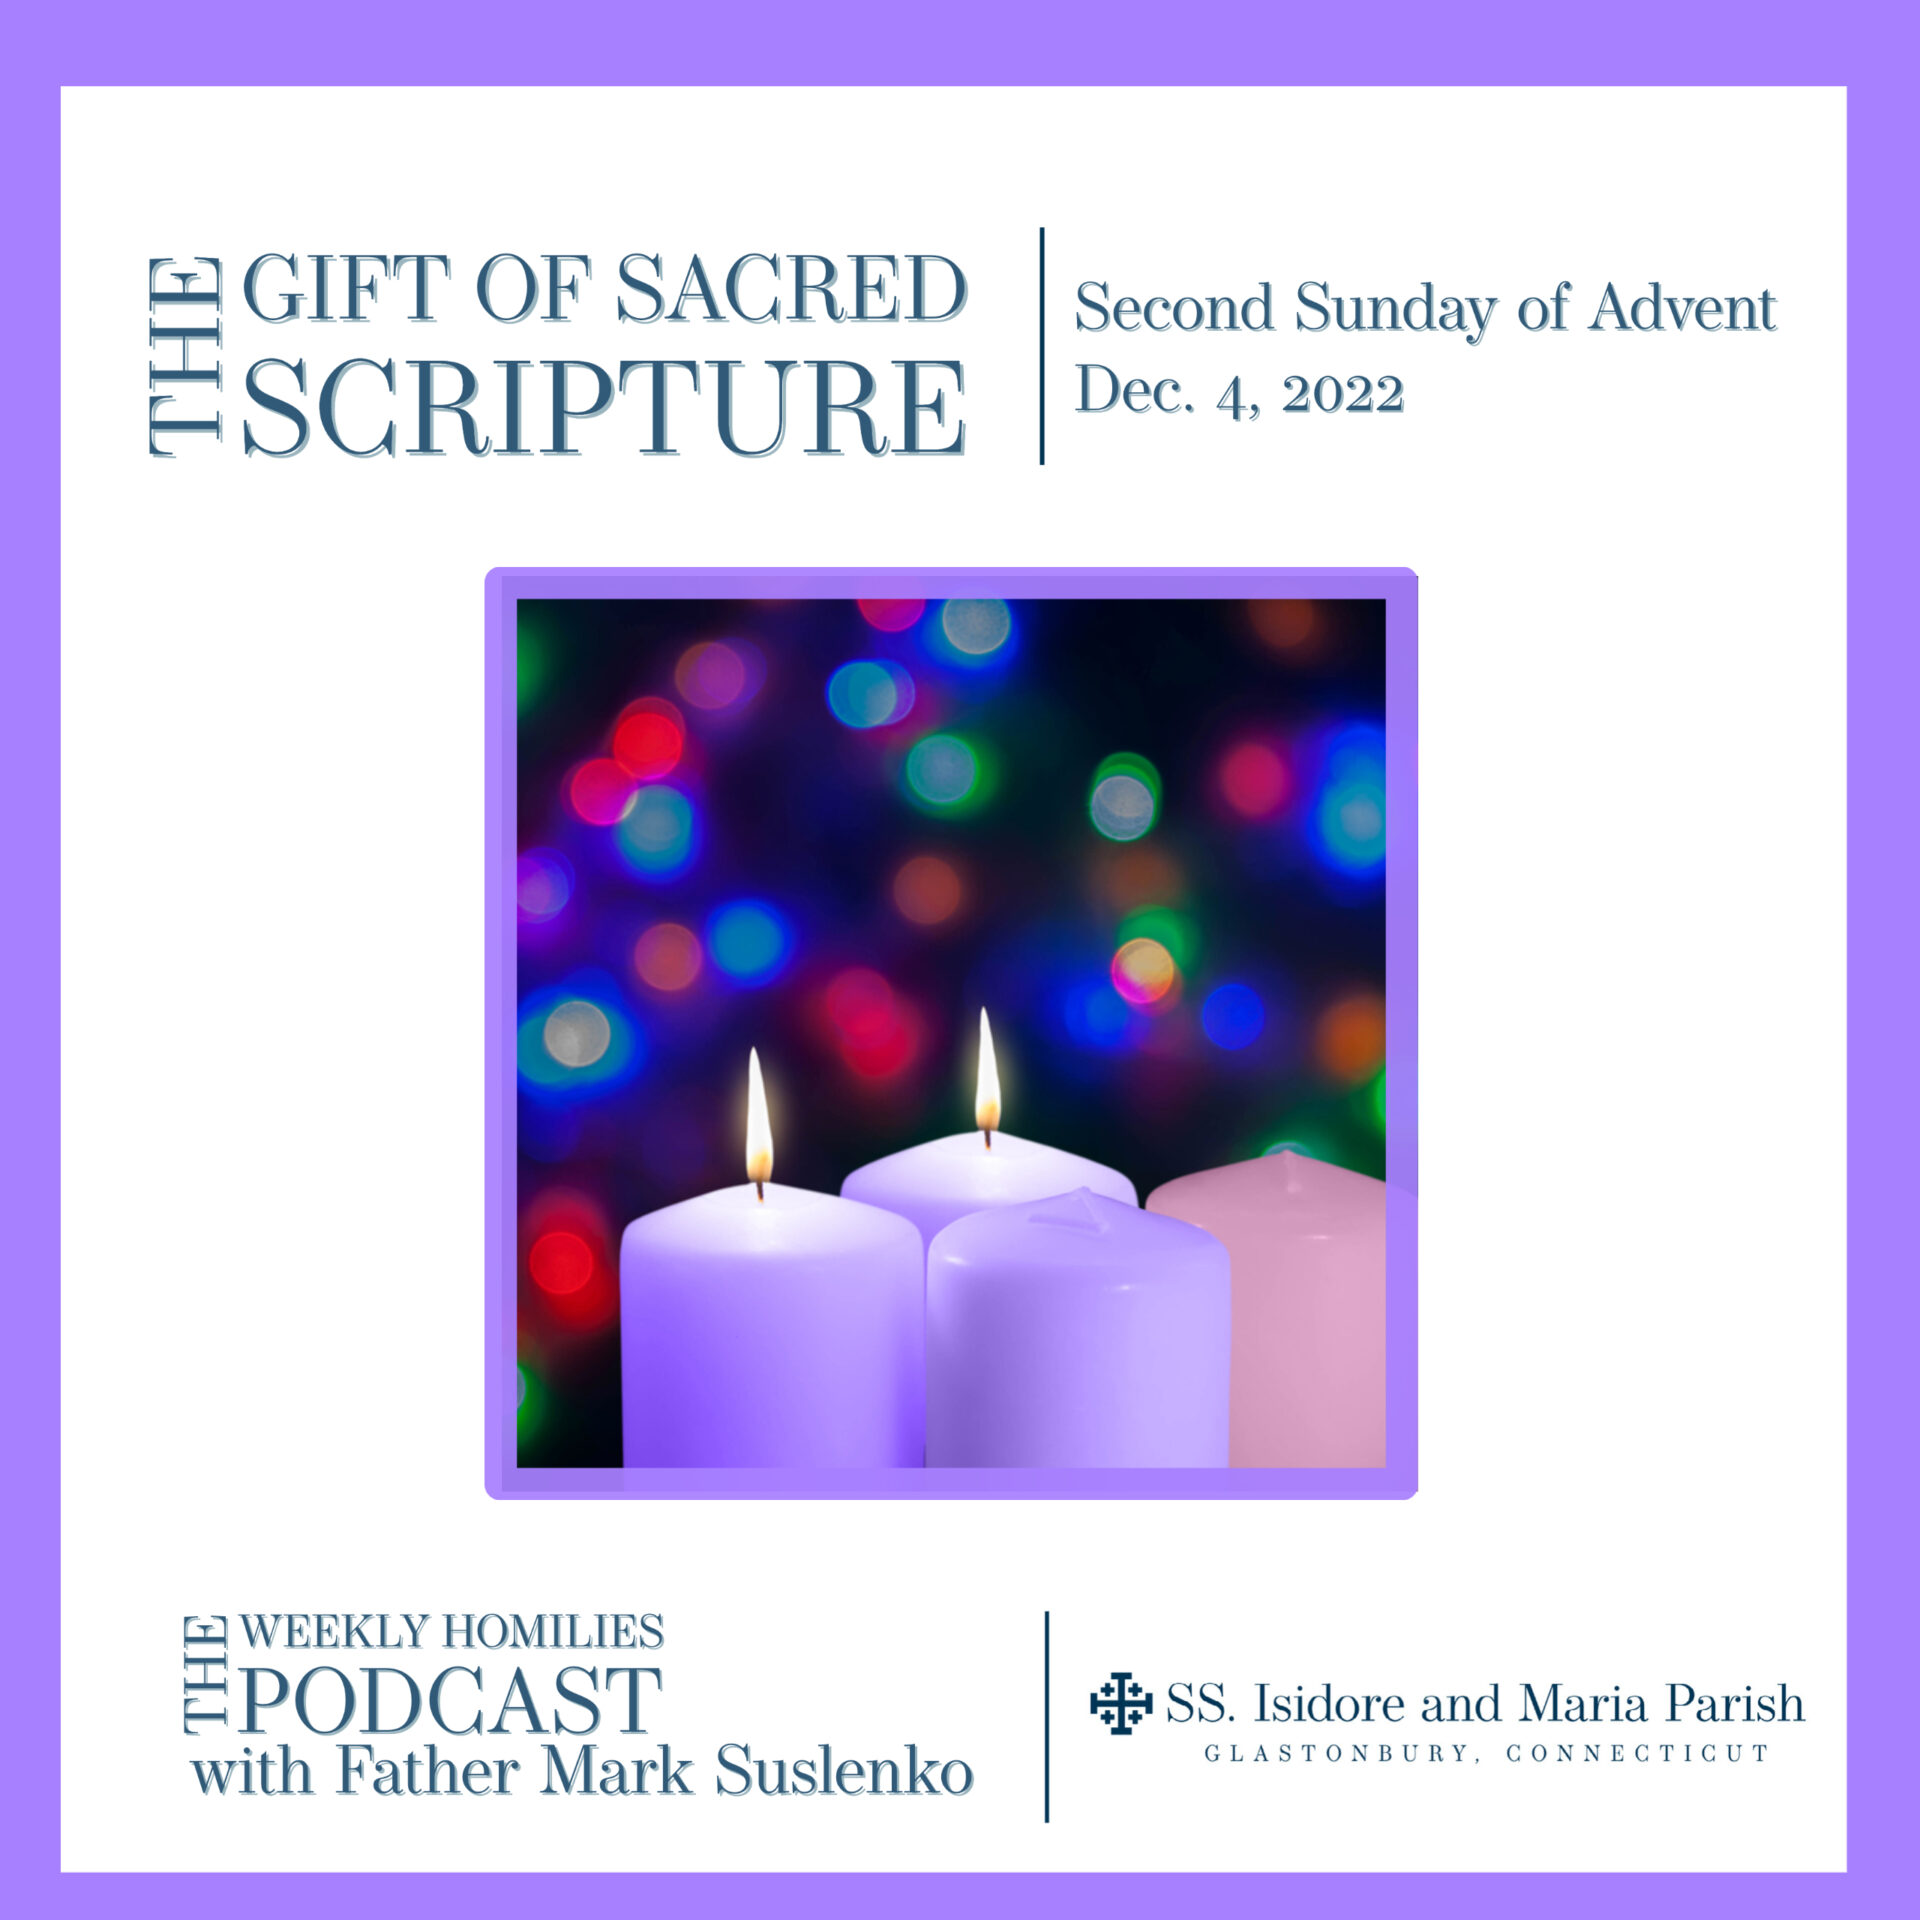 PODCAST: The Gift of Sacred Scripture